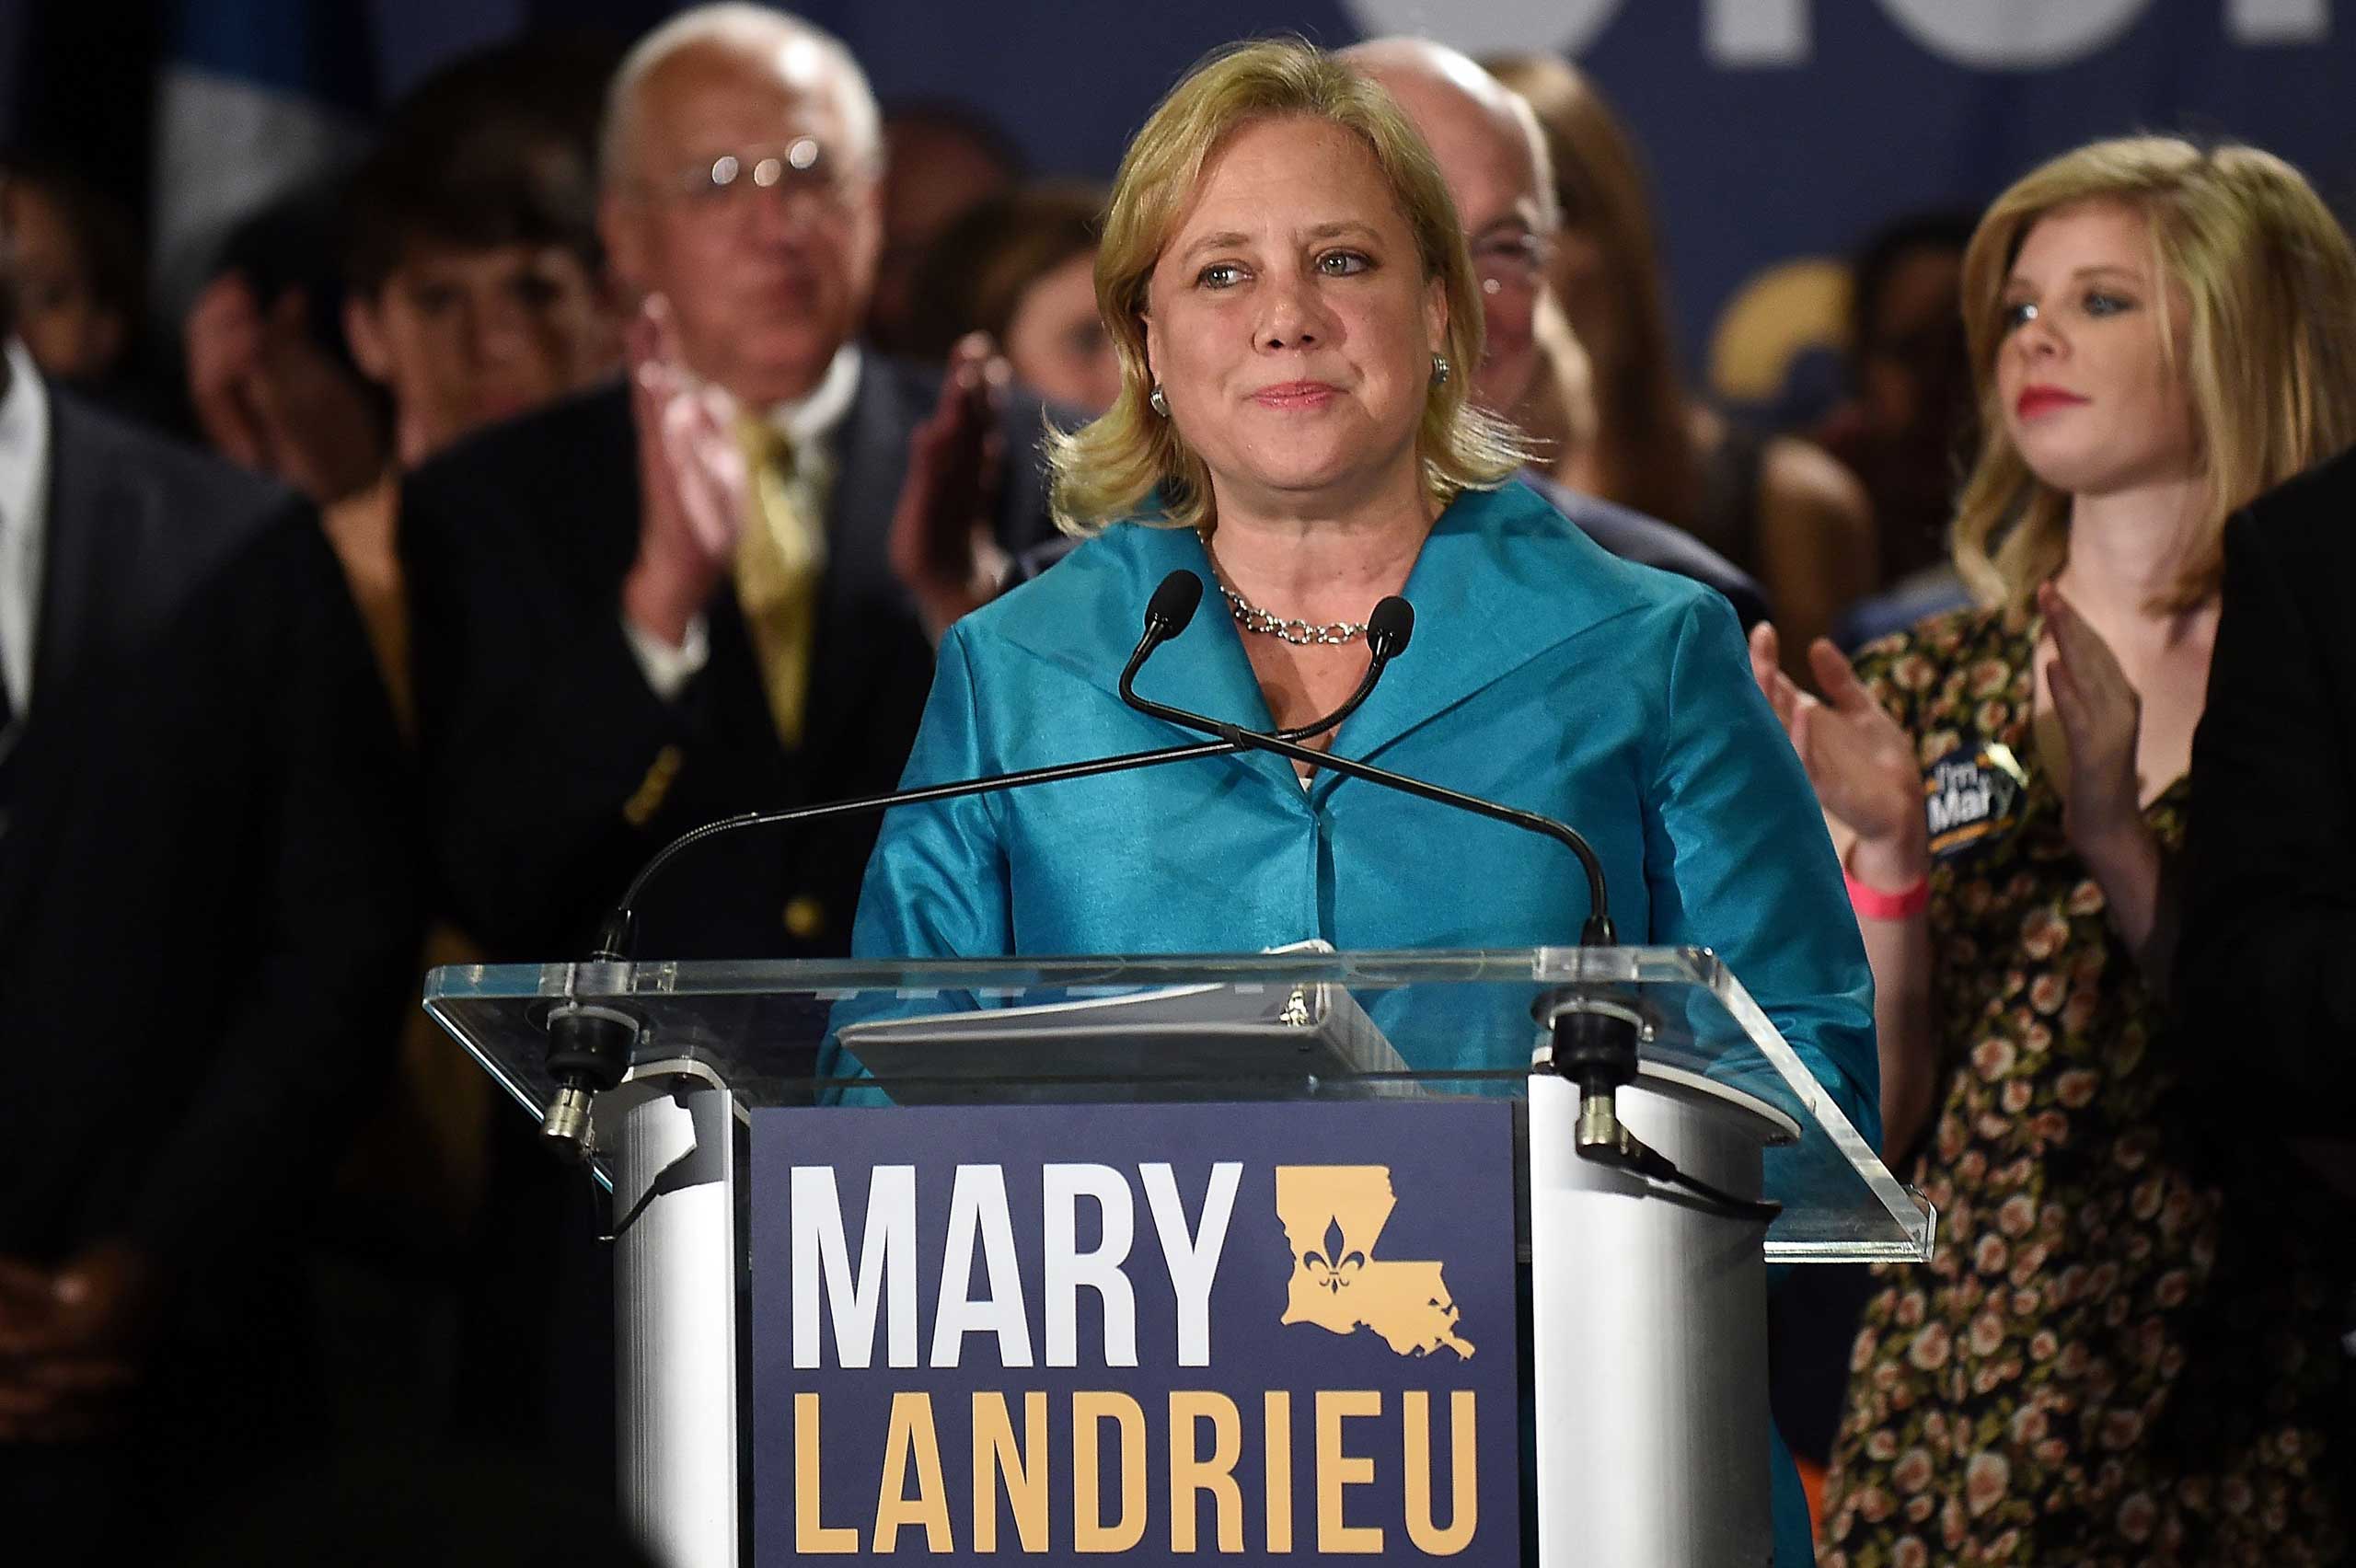 Sen. Landrieu Gathers With Supporters On Election Night In New Orleans